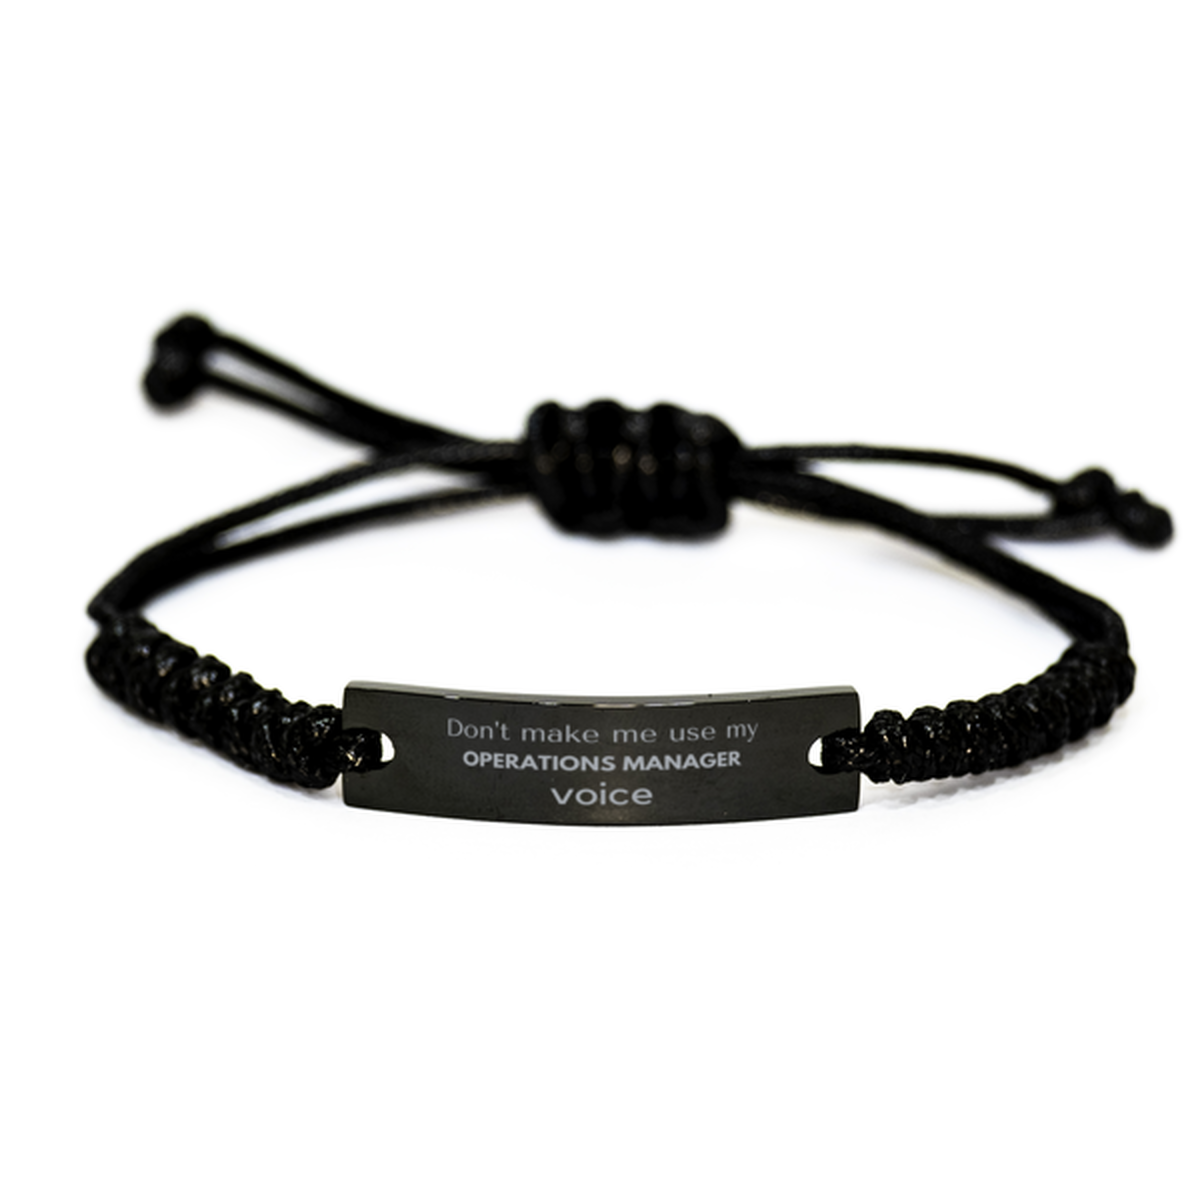 Don't make me use my Operations Manager voice, Sarcasm Operations Manager Gifts, Christmas Operations Manager Black Rope Bracelet Birthday Unique Gifts For Operations Manager Coworkers, Men, Women, Colleague, Friends